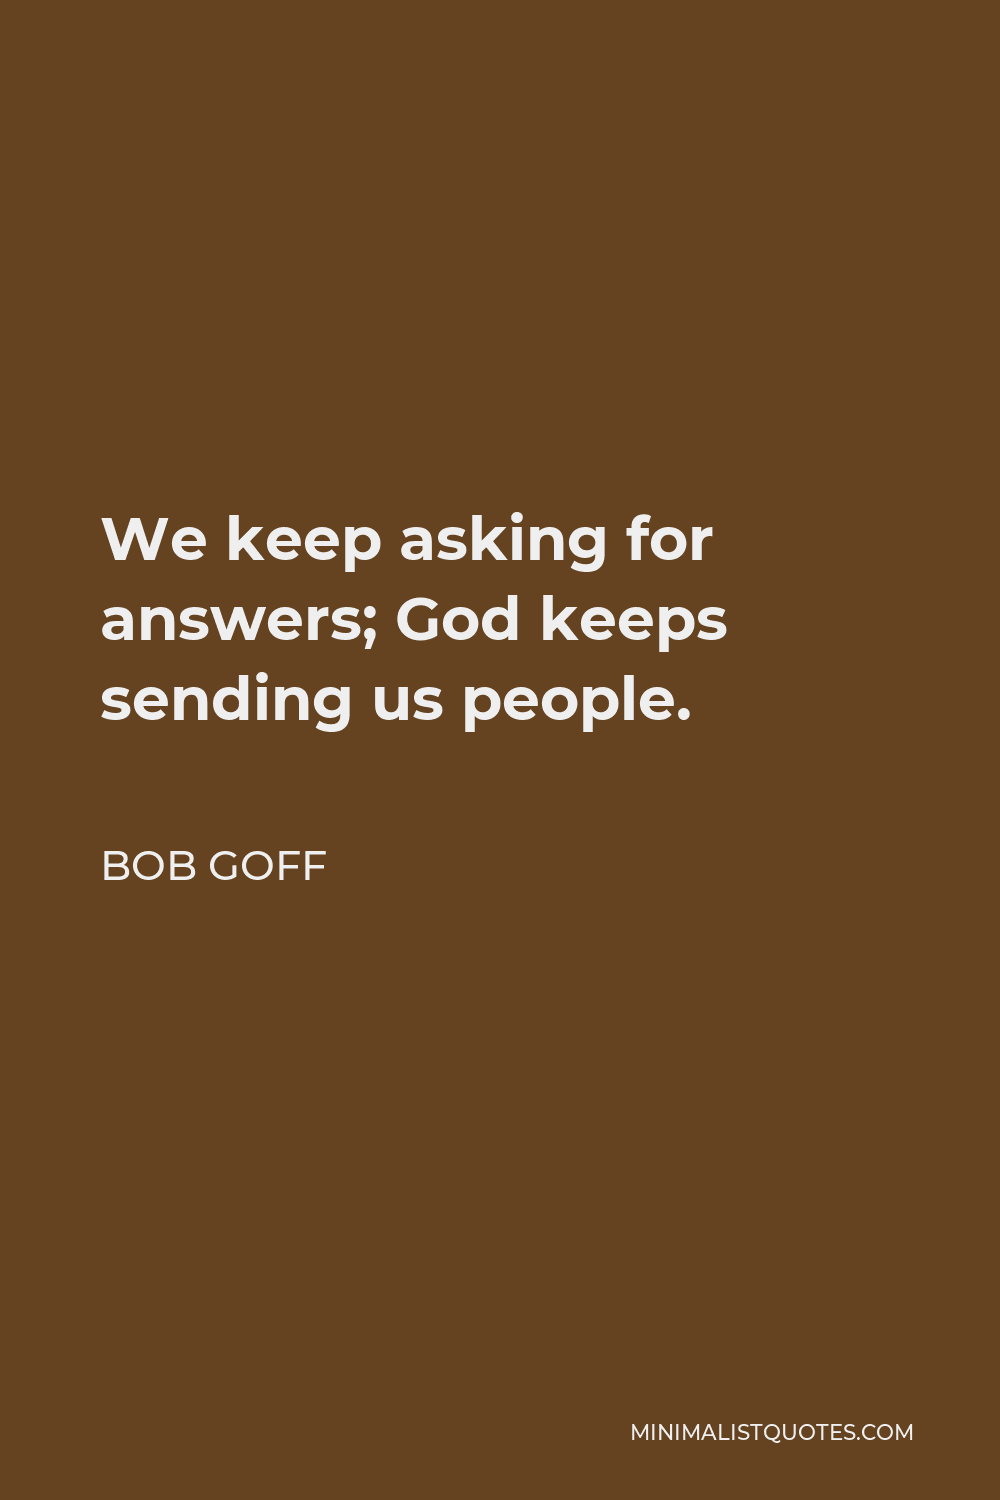 Bob Goff Quote - We keep asking for answers; God keeps sending us people.